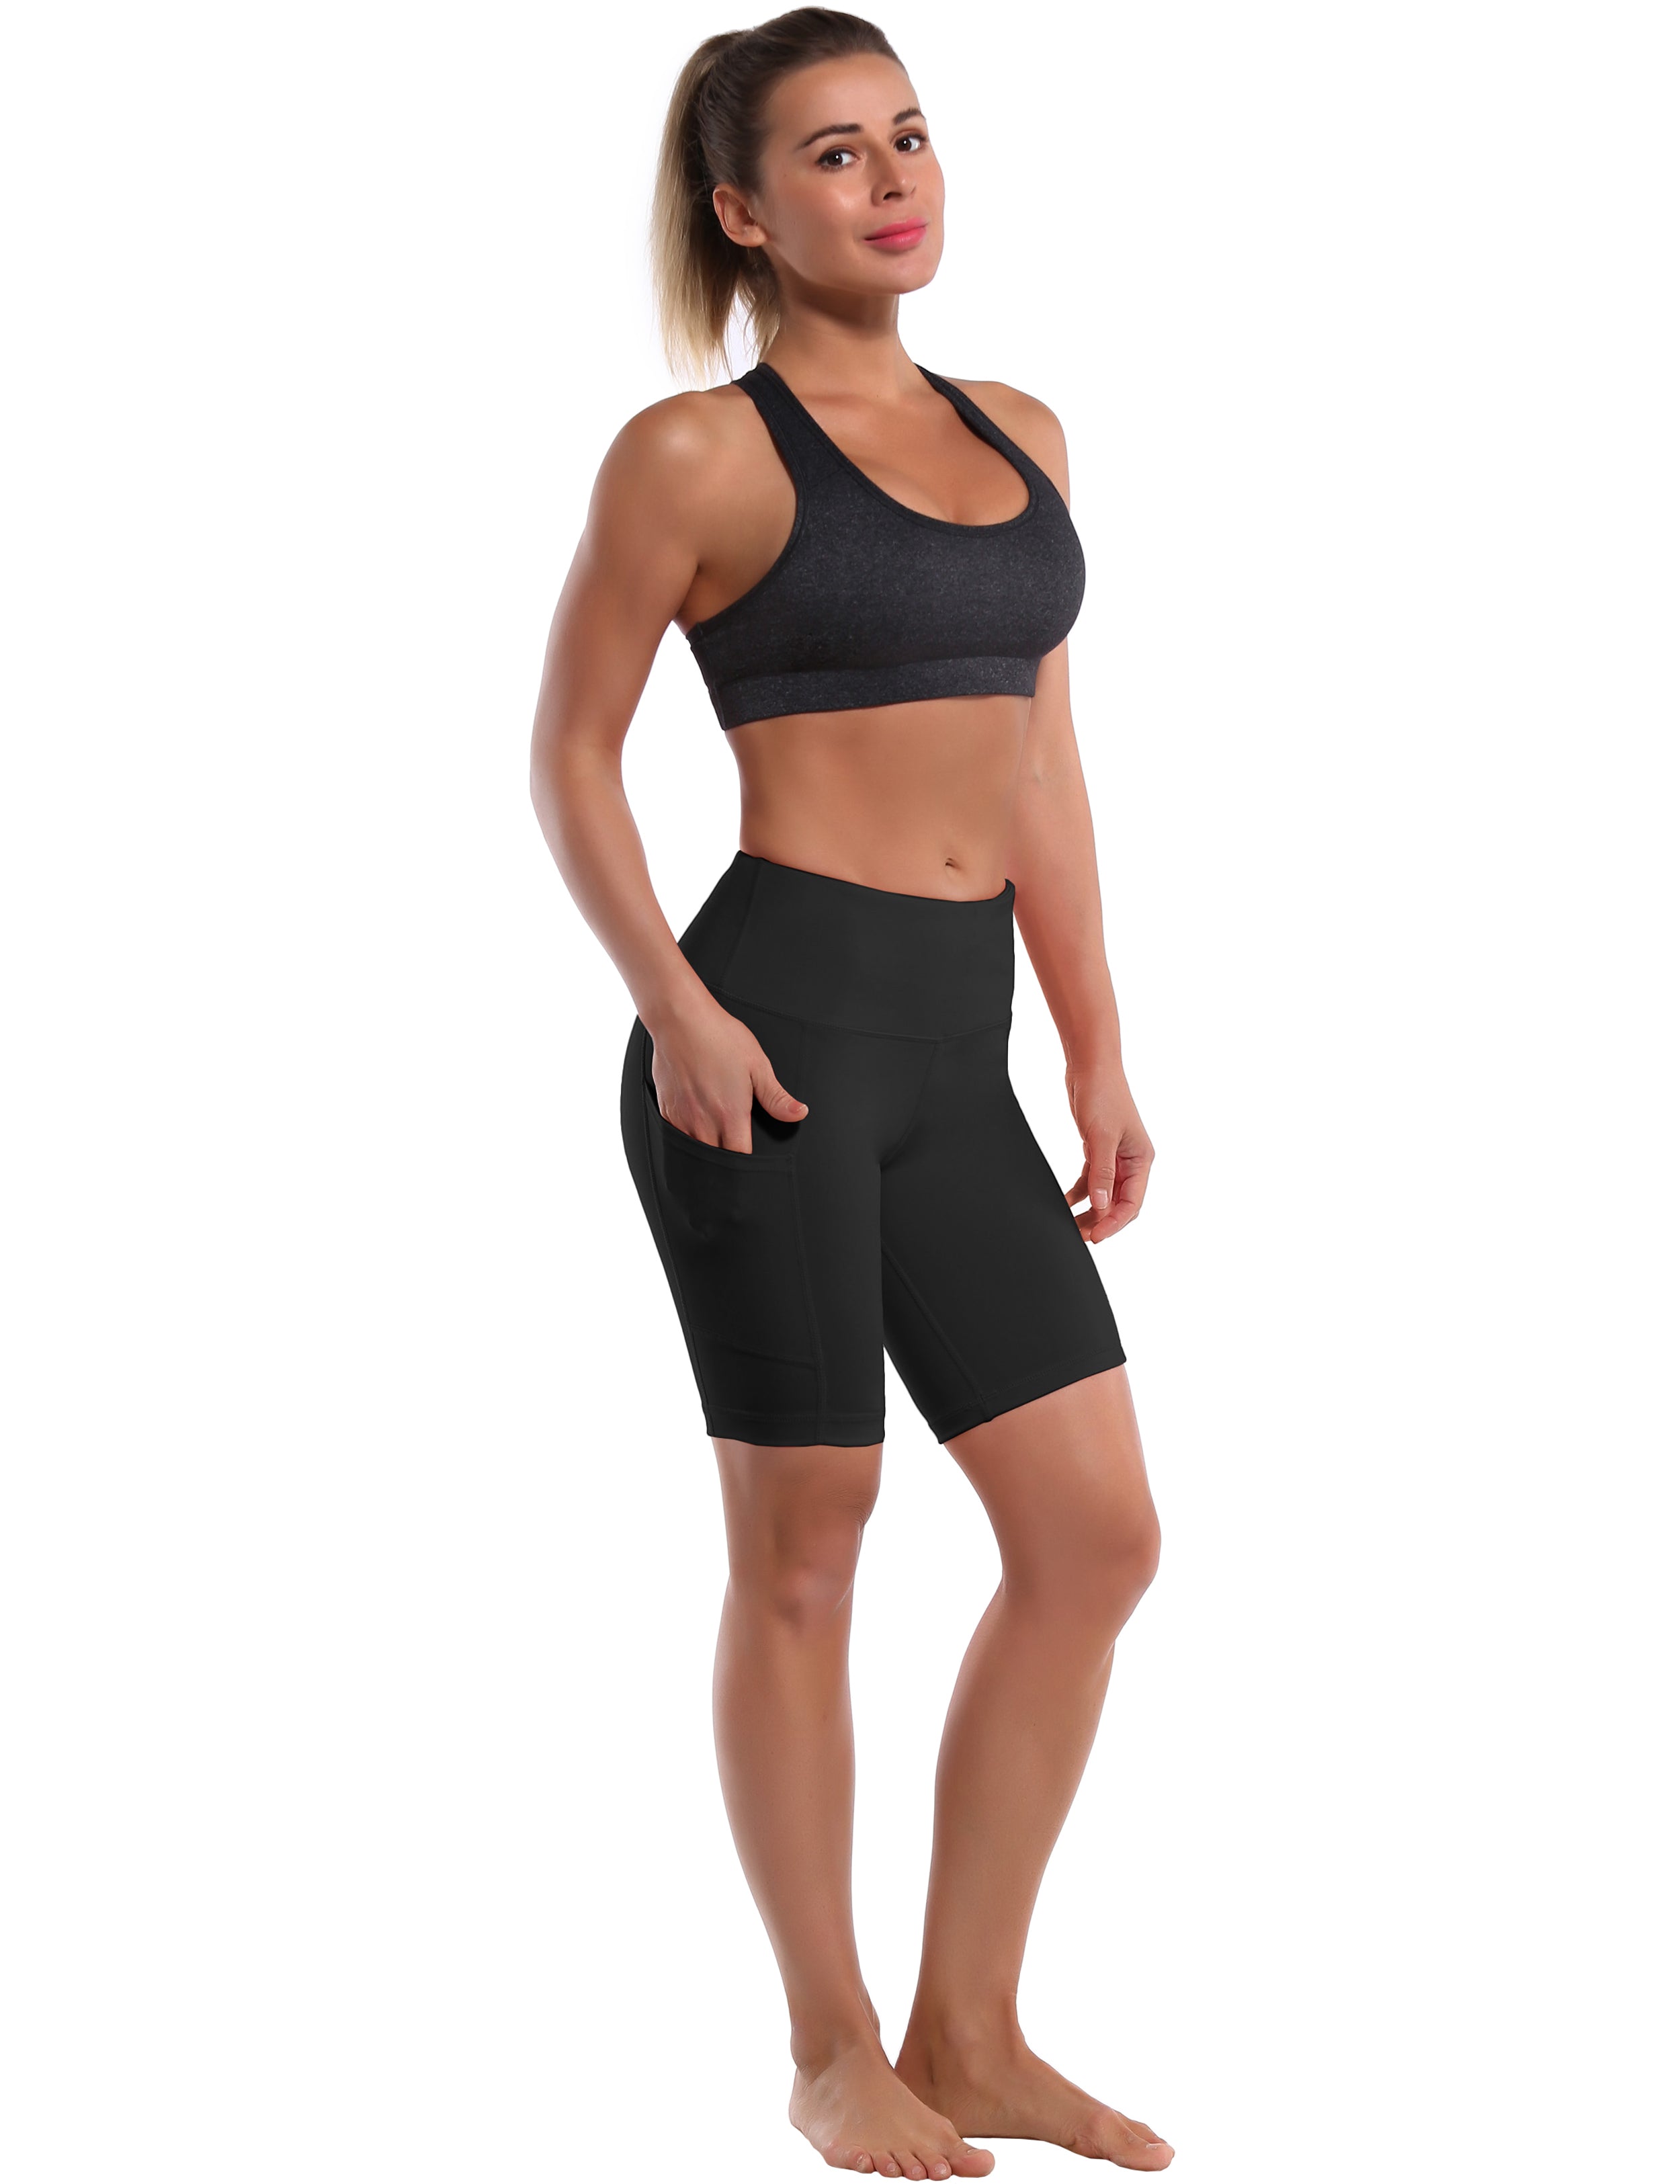 8" Side Pockets yogastudio Shorts black Sleek, soft, smooth and totally comfortable: our newest style is here. Softest-ever fabric High elasticity High density 4-way stretch Fabric doesn't attract lint easily No see-through Moisture-wicking Machine wash 75% Nylon, 25% Spandex